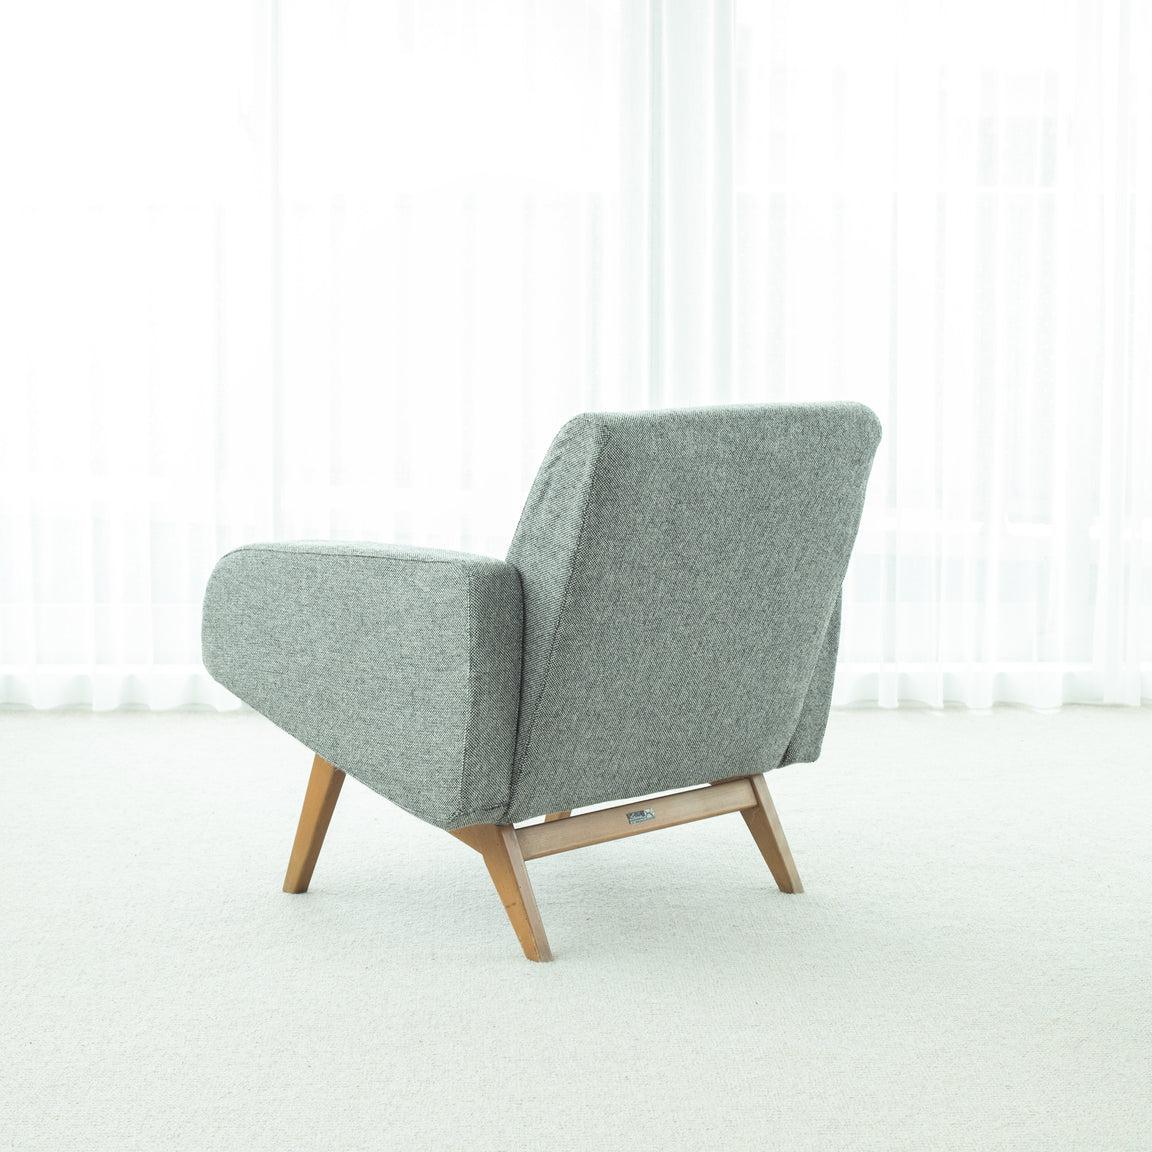 Joseph-André Motte Armchair 740 for Steiner, 1950s In Good Condition For Sale In Edogawa-ku Tokyo, JP